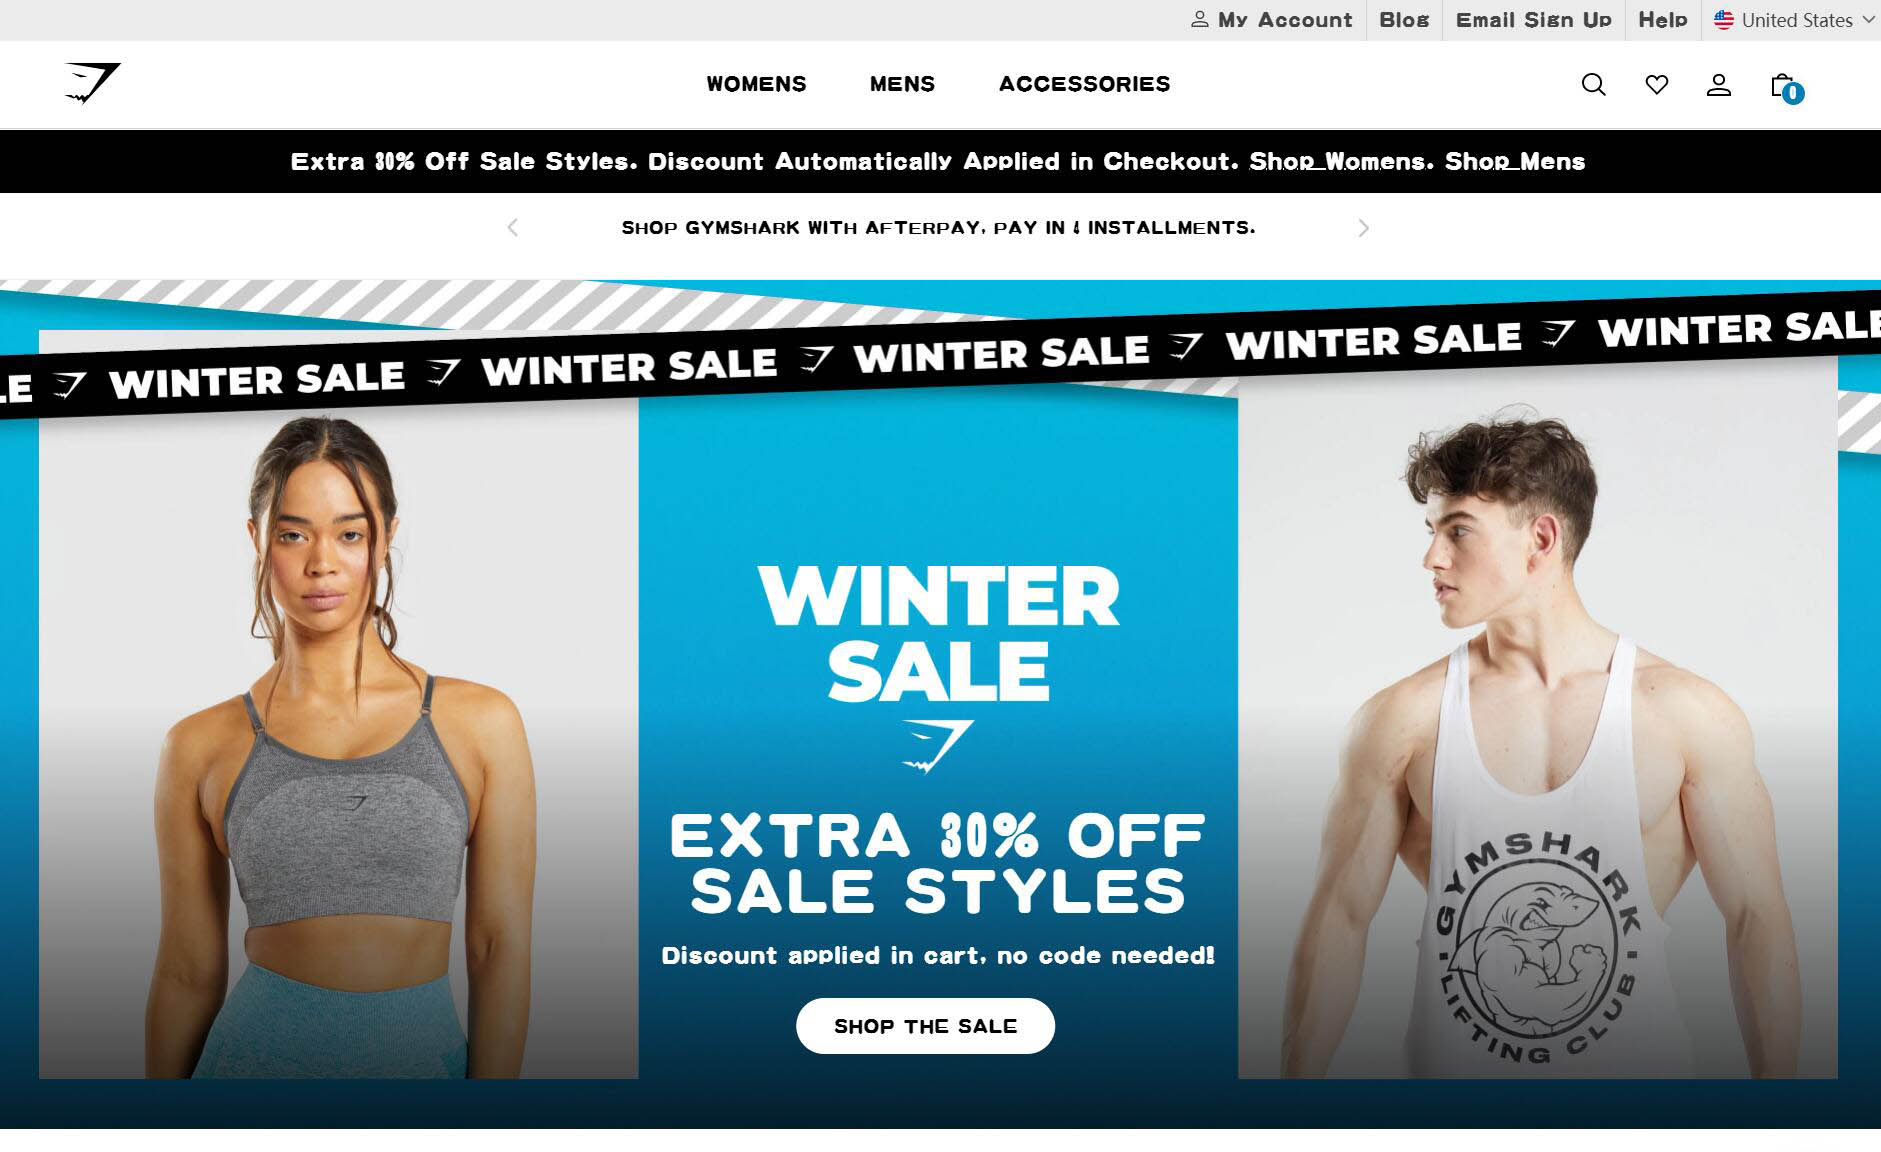 New offer launched: Gymshark Affiliate Program